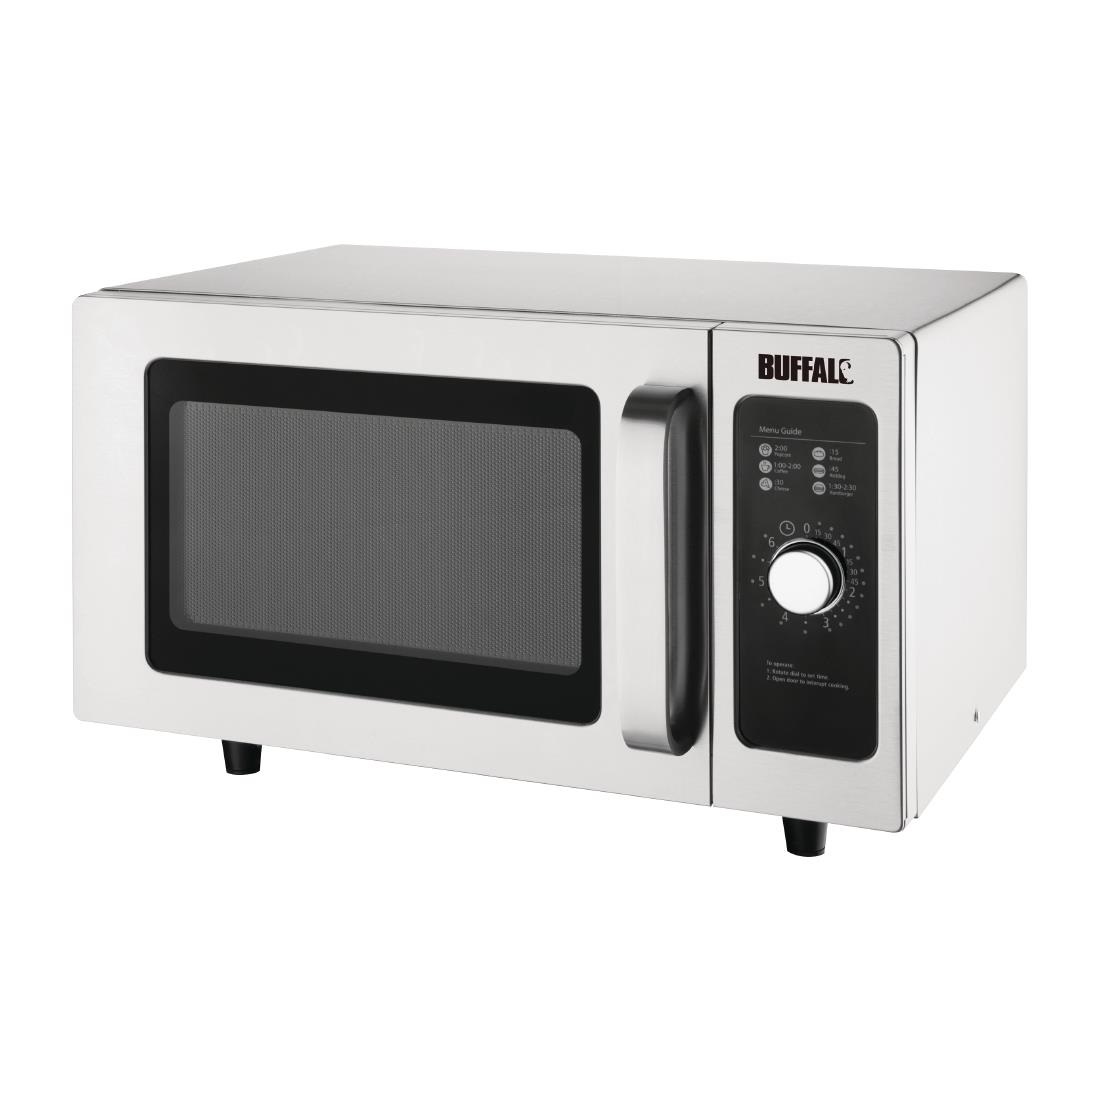 Buffalo Manual Commercial Microwave Oven 1000W (FB861)